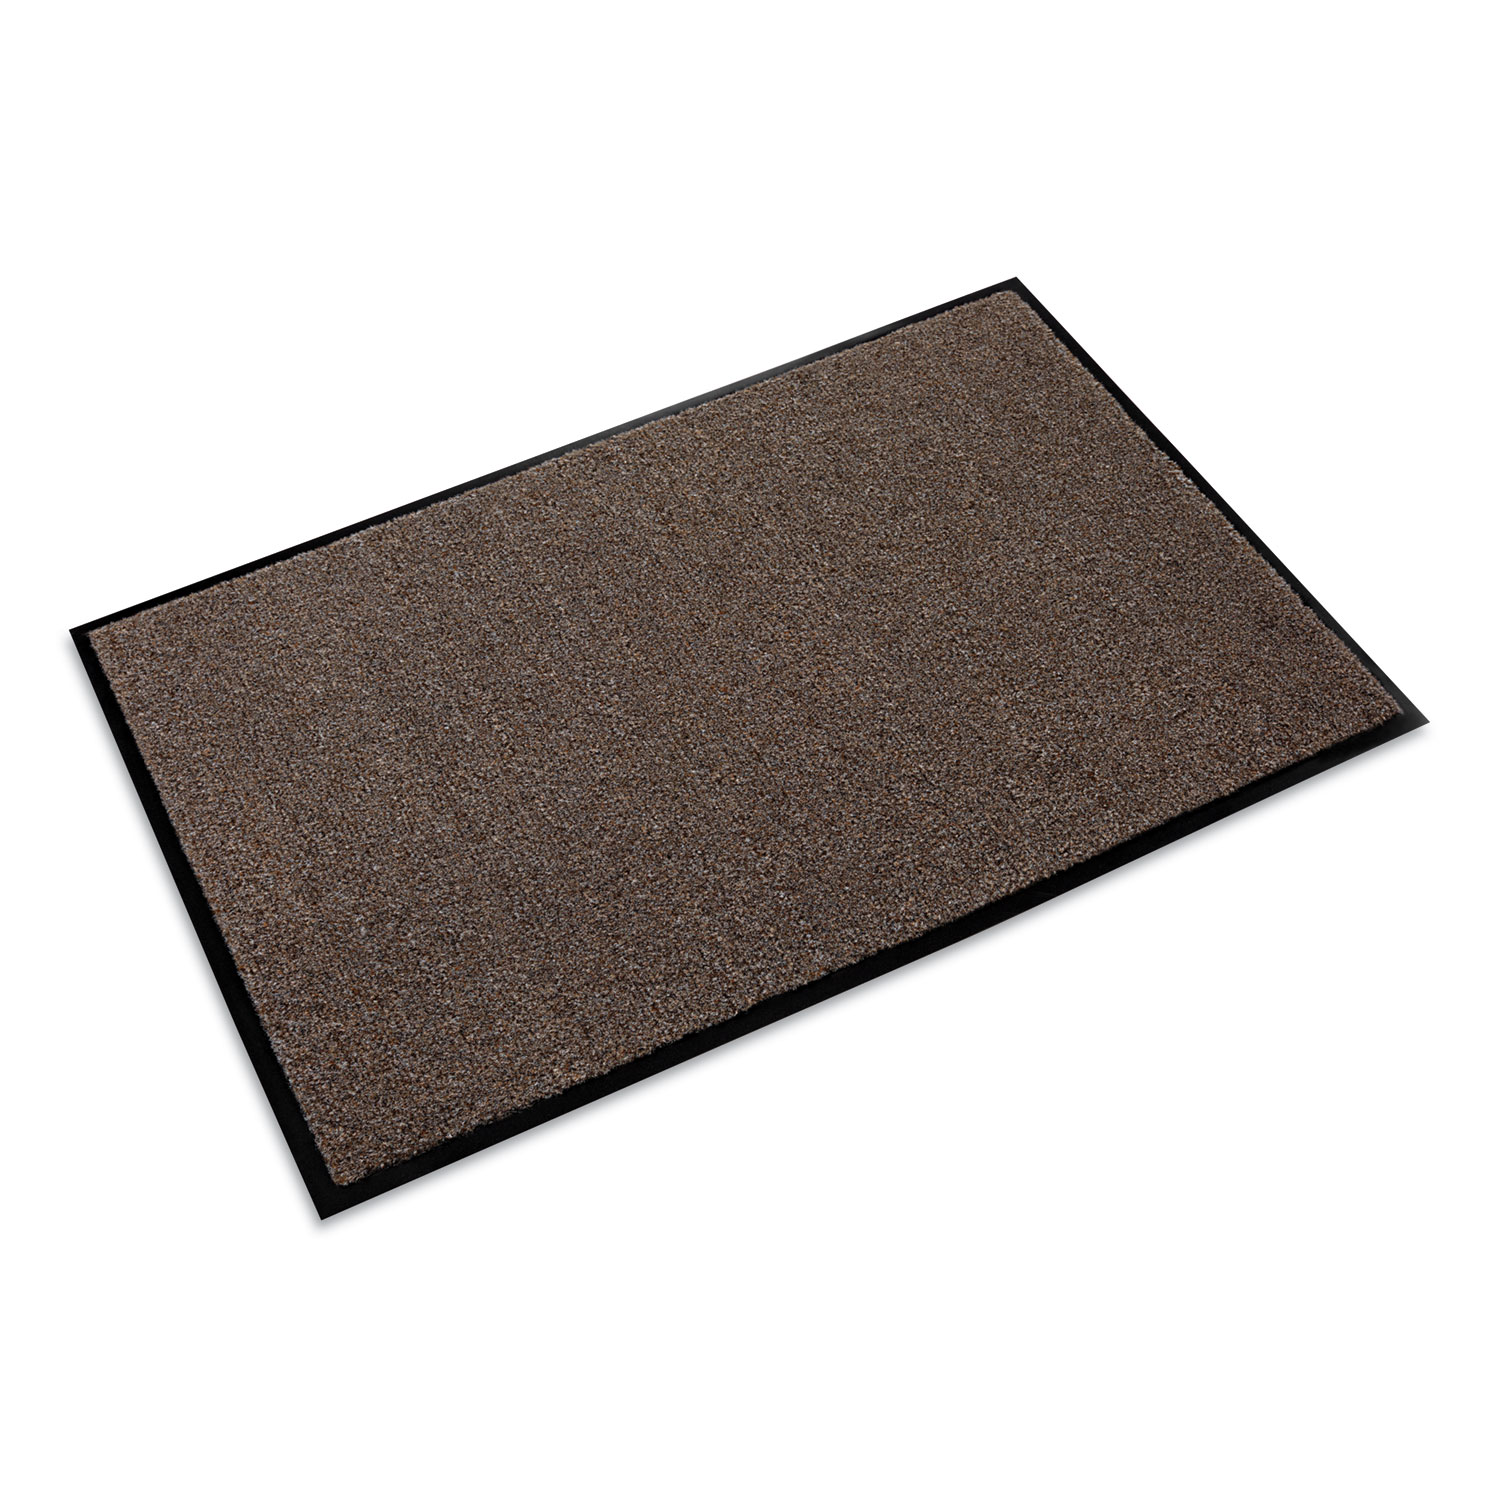  Crown GS 0310CH Rely-On Olefin Indoor Wiper Mat, 36 x 120, Charcoal (CWNGS0310CH) 